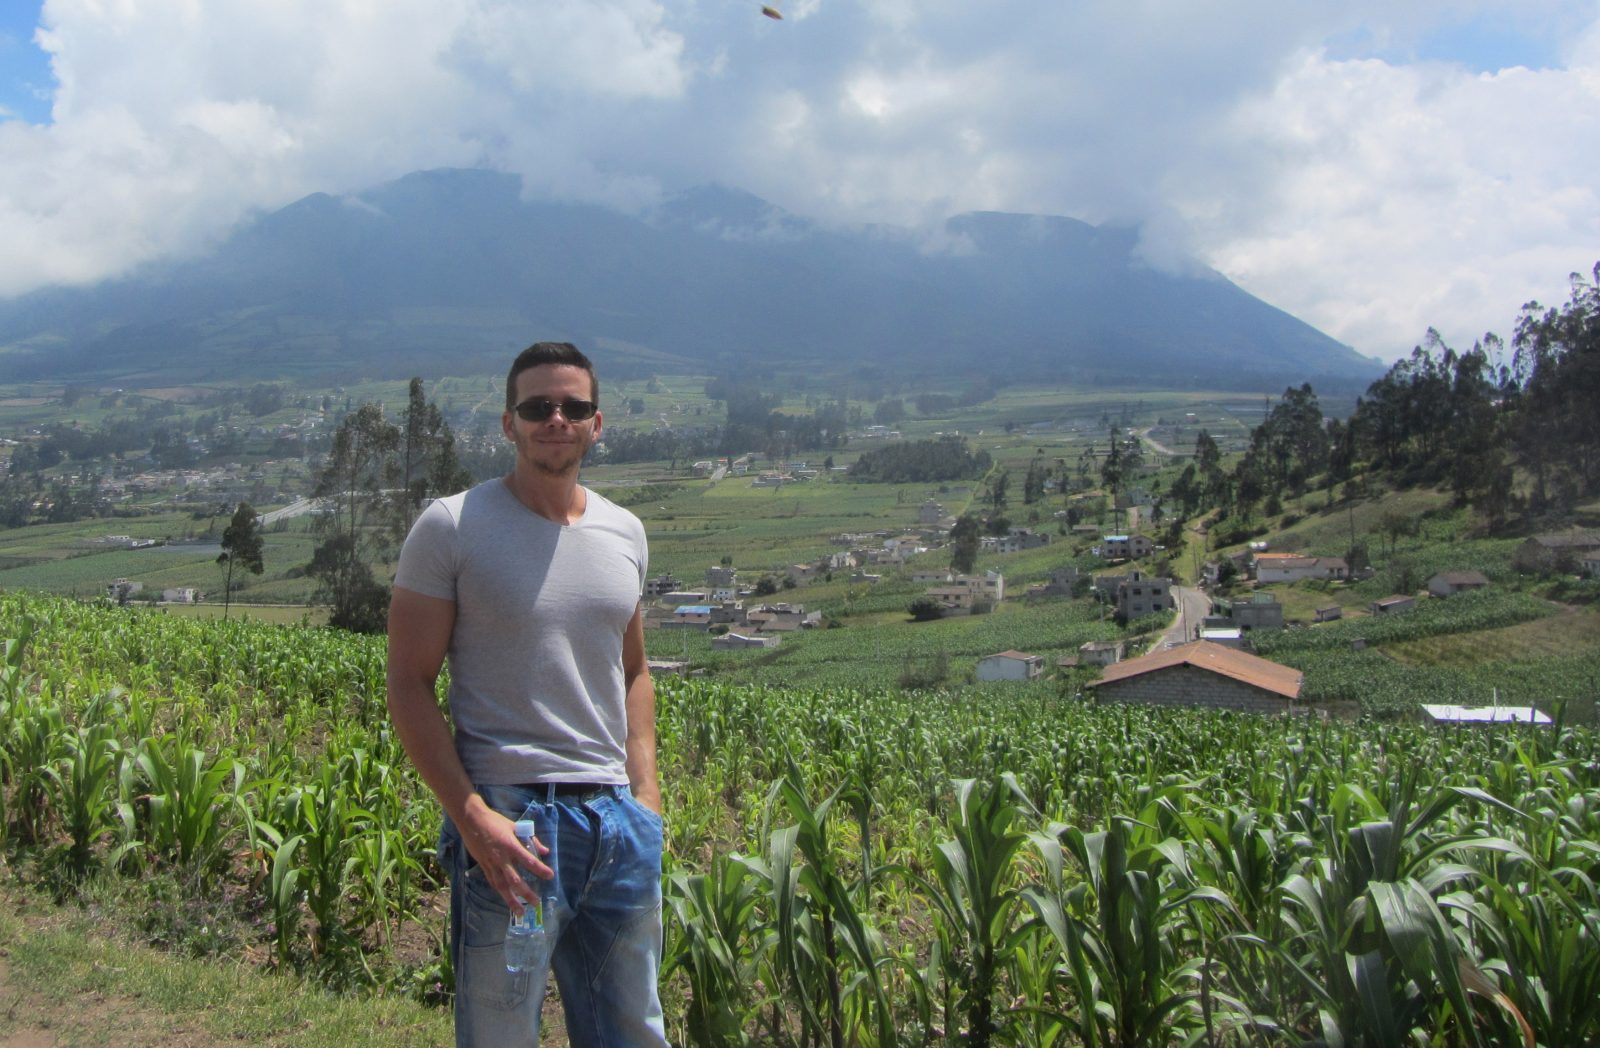 Pascal Lupien stands on a road overlooking a crop field and valley community, with a mountain touching clouds in the background